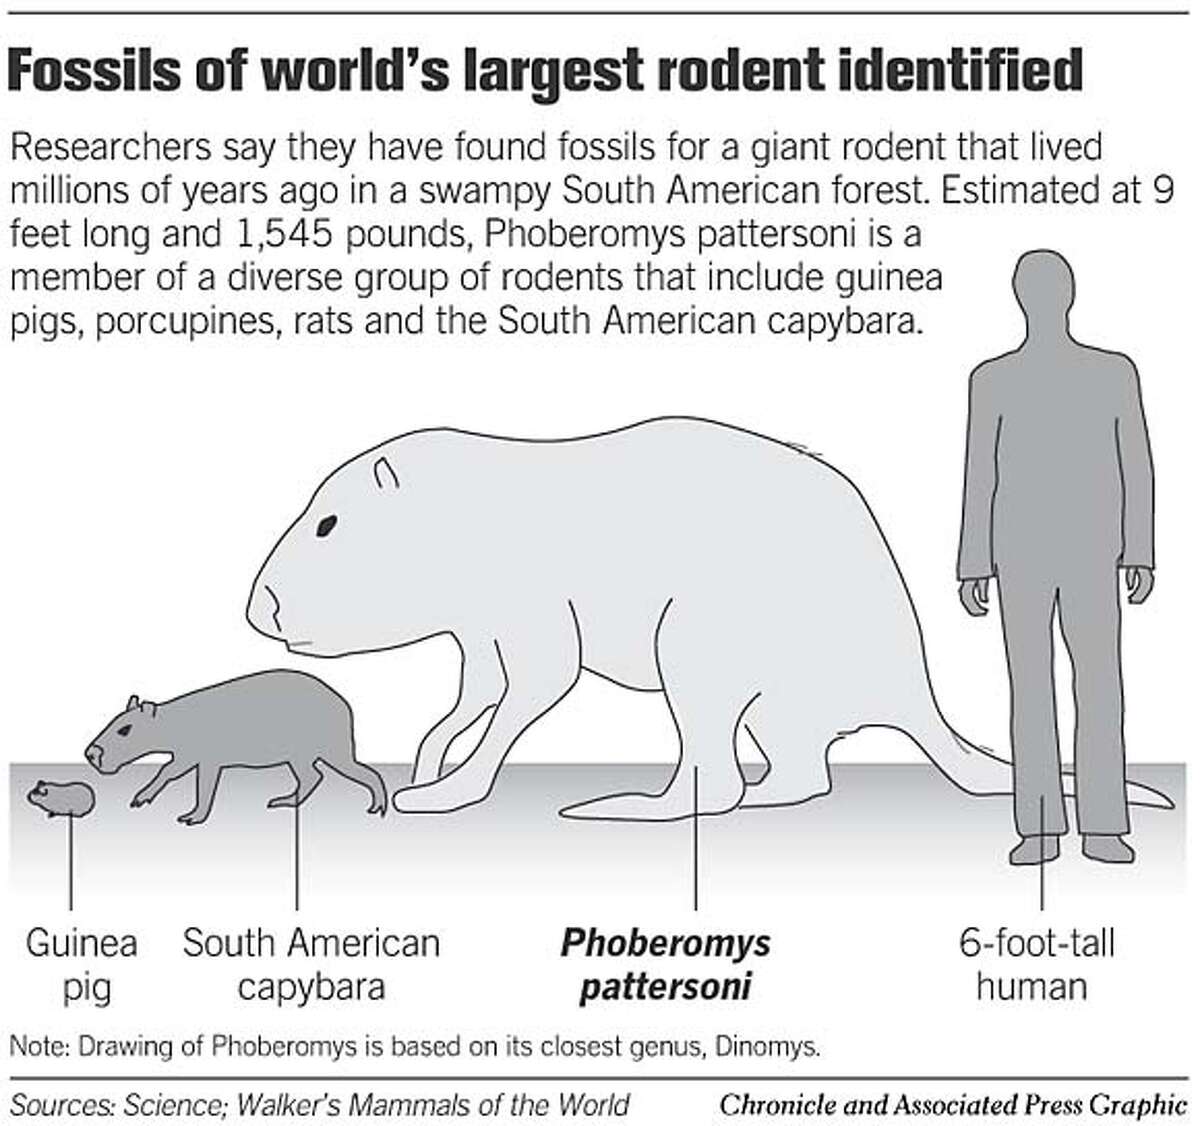 rodent fossils stir scientists / Relative of gives researchers evolutionary pause